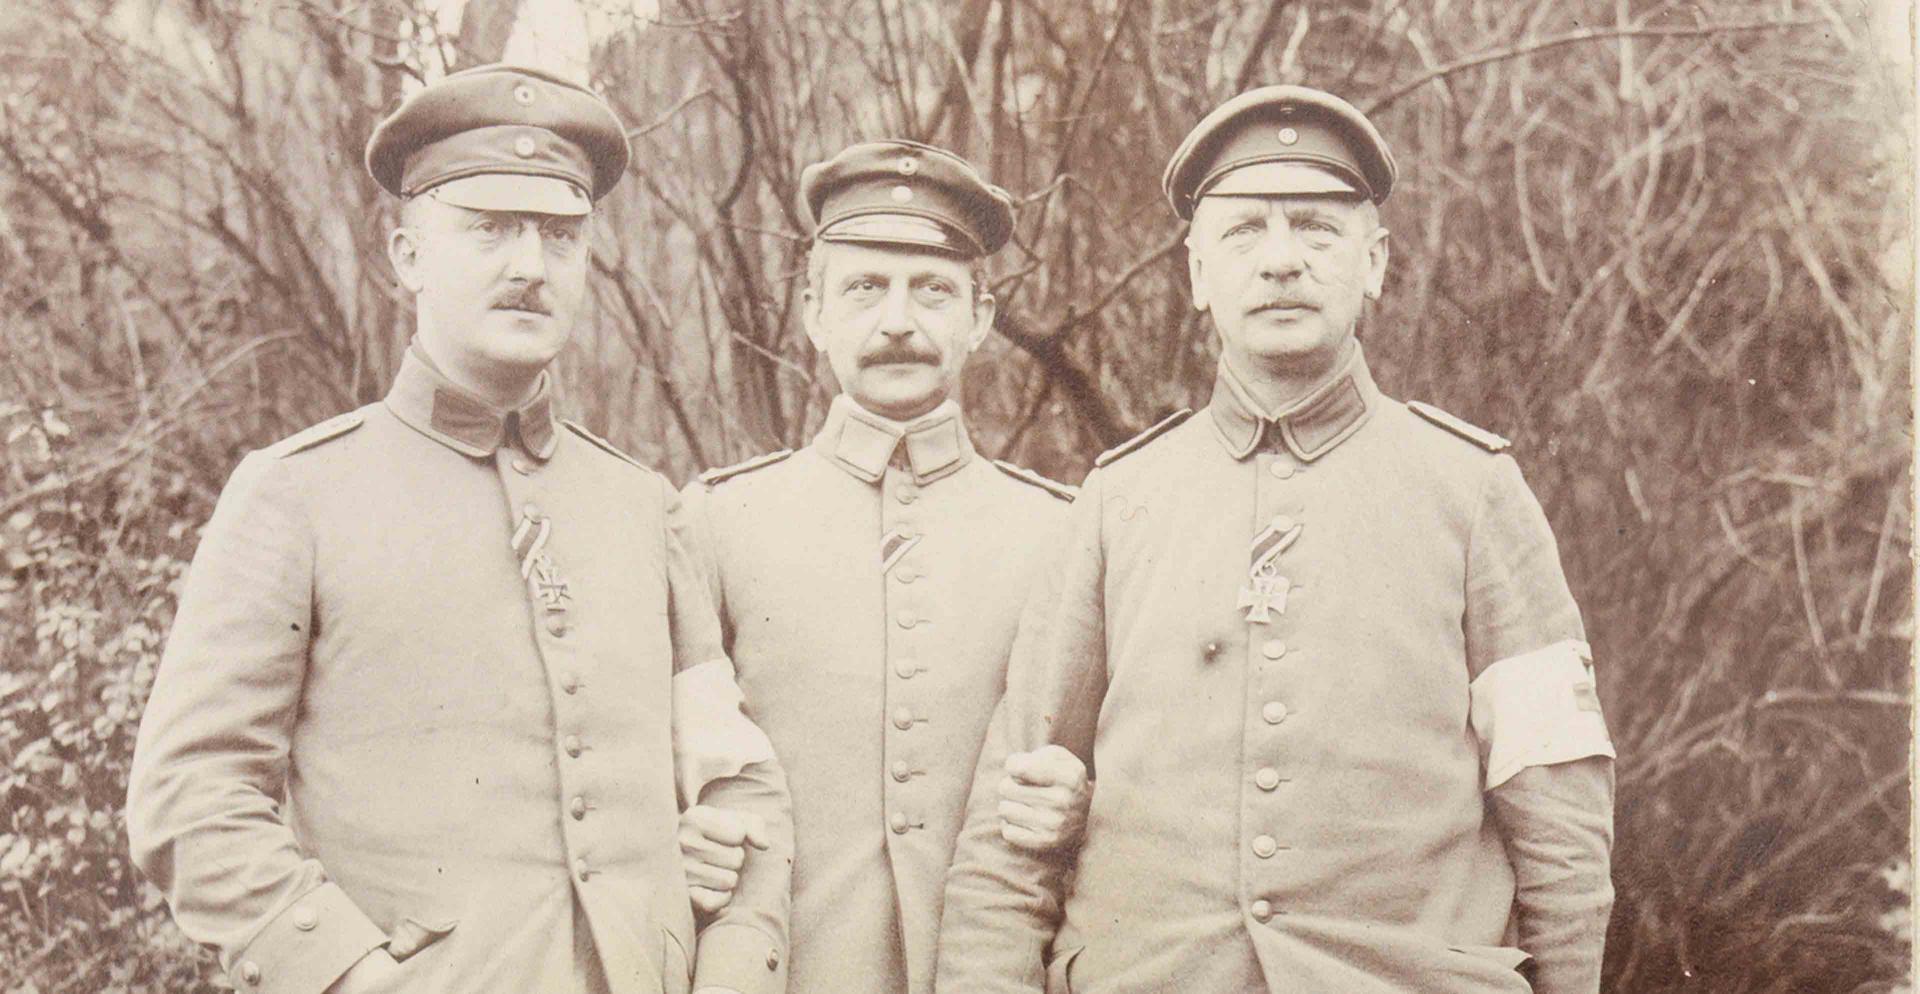 Black and white photograph of three soldiers in uniform standing in front of a green area.